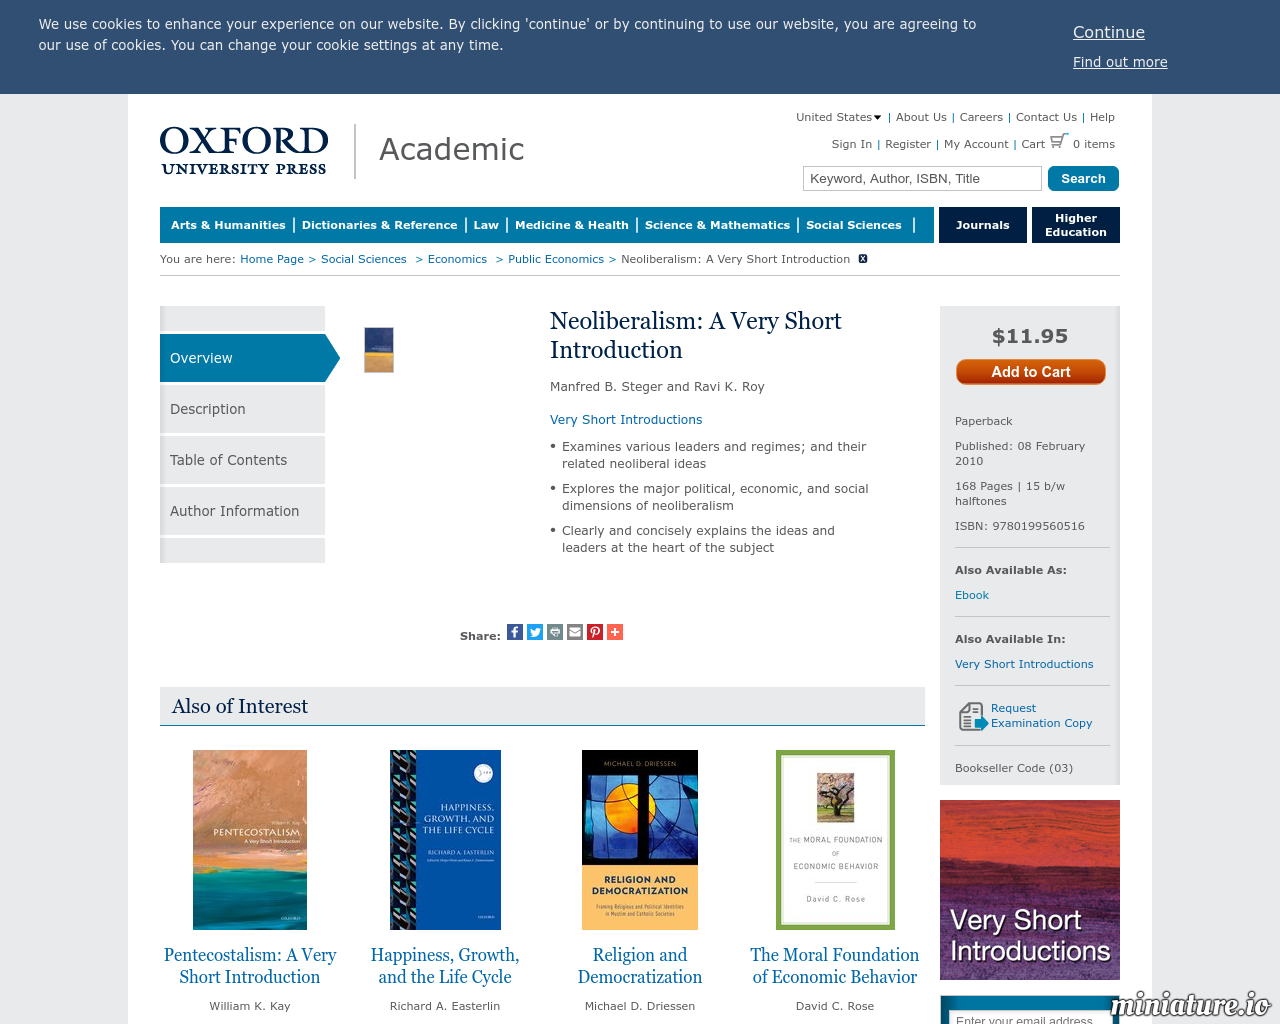 https://global.oup.com/academic/product/neoliberalism-a-very-short-introduction-9780199560516?cc=us&lang=enのプレビュー画像